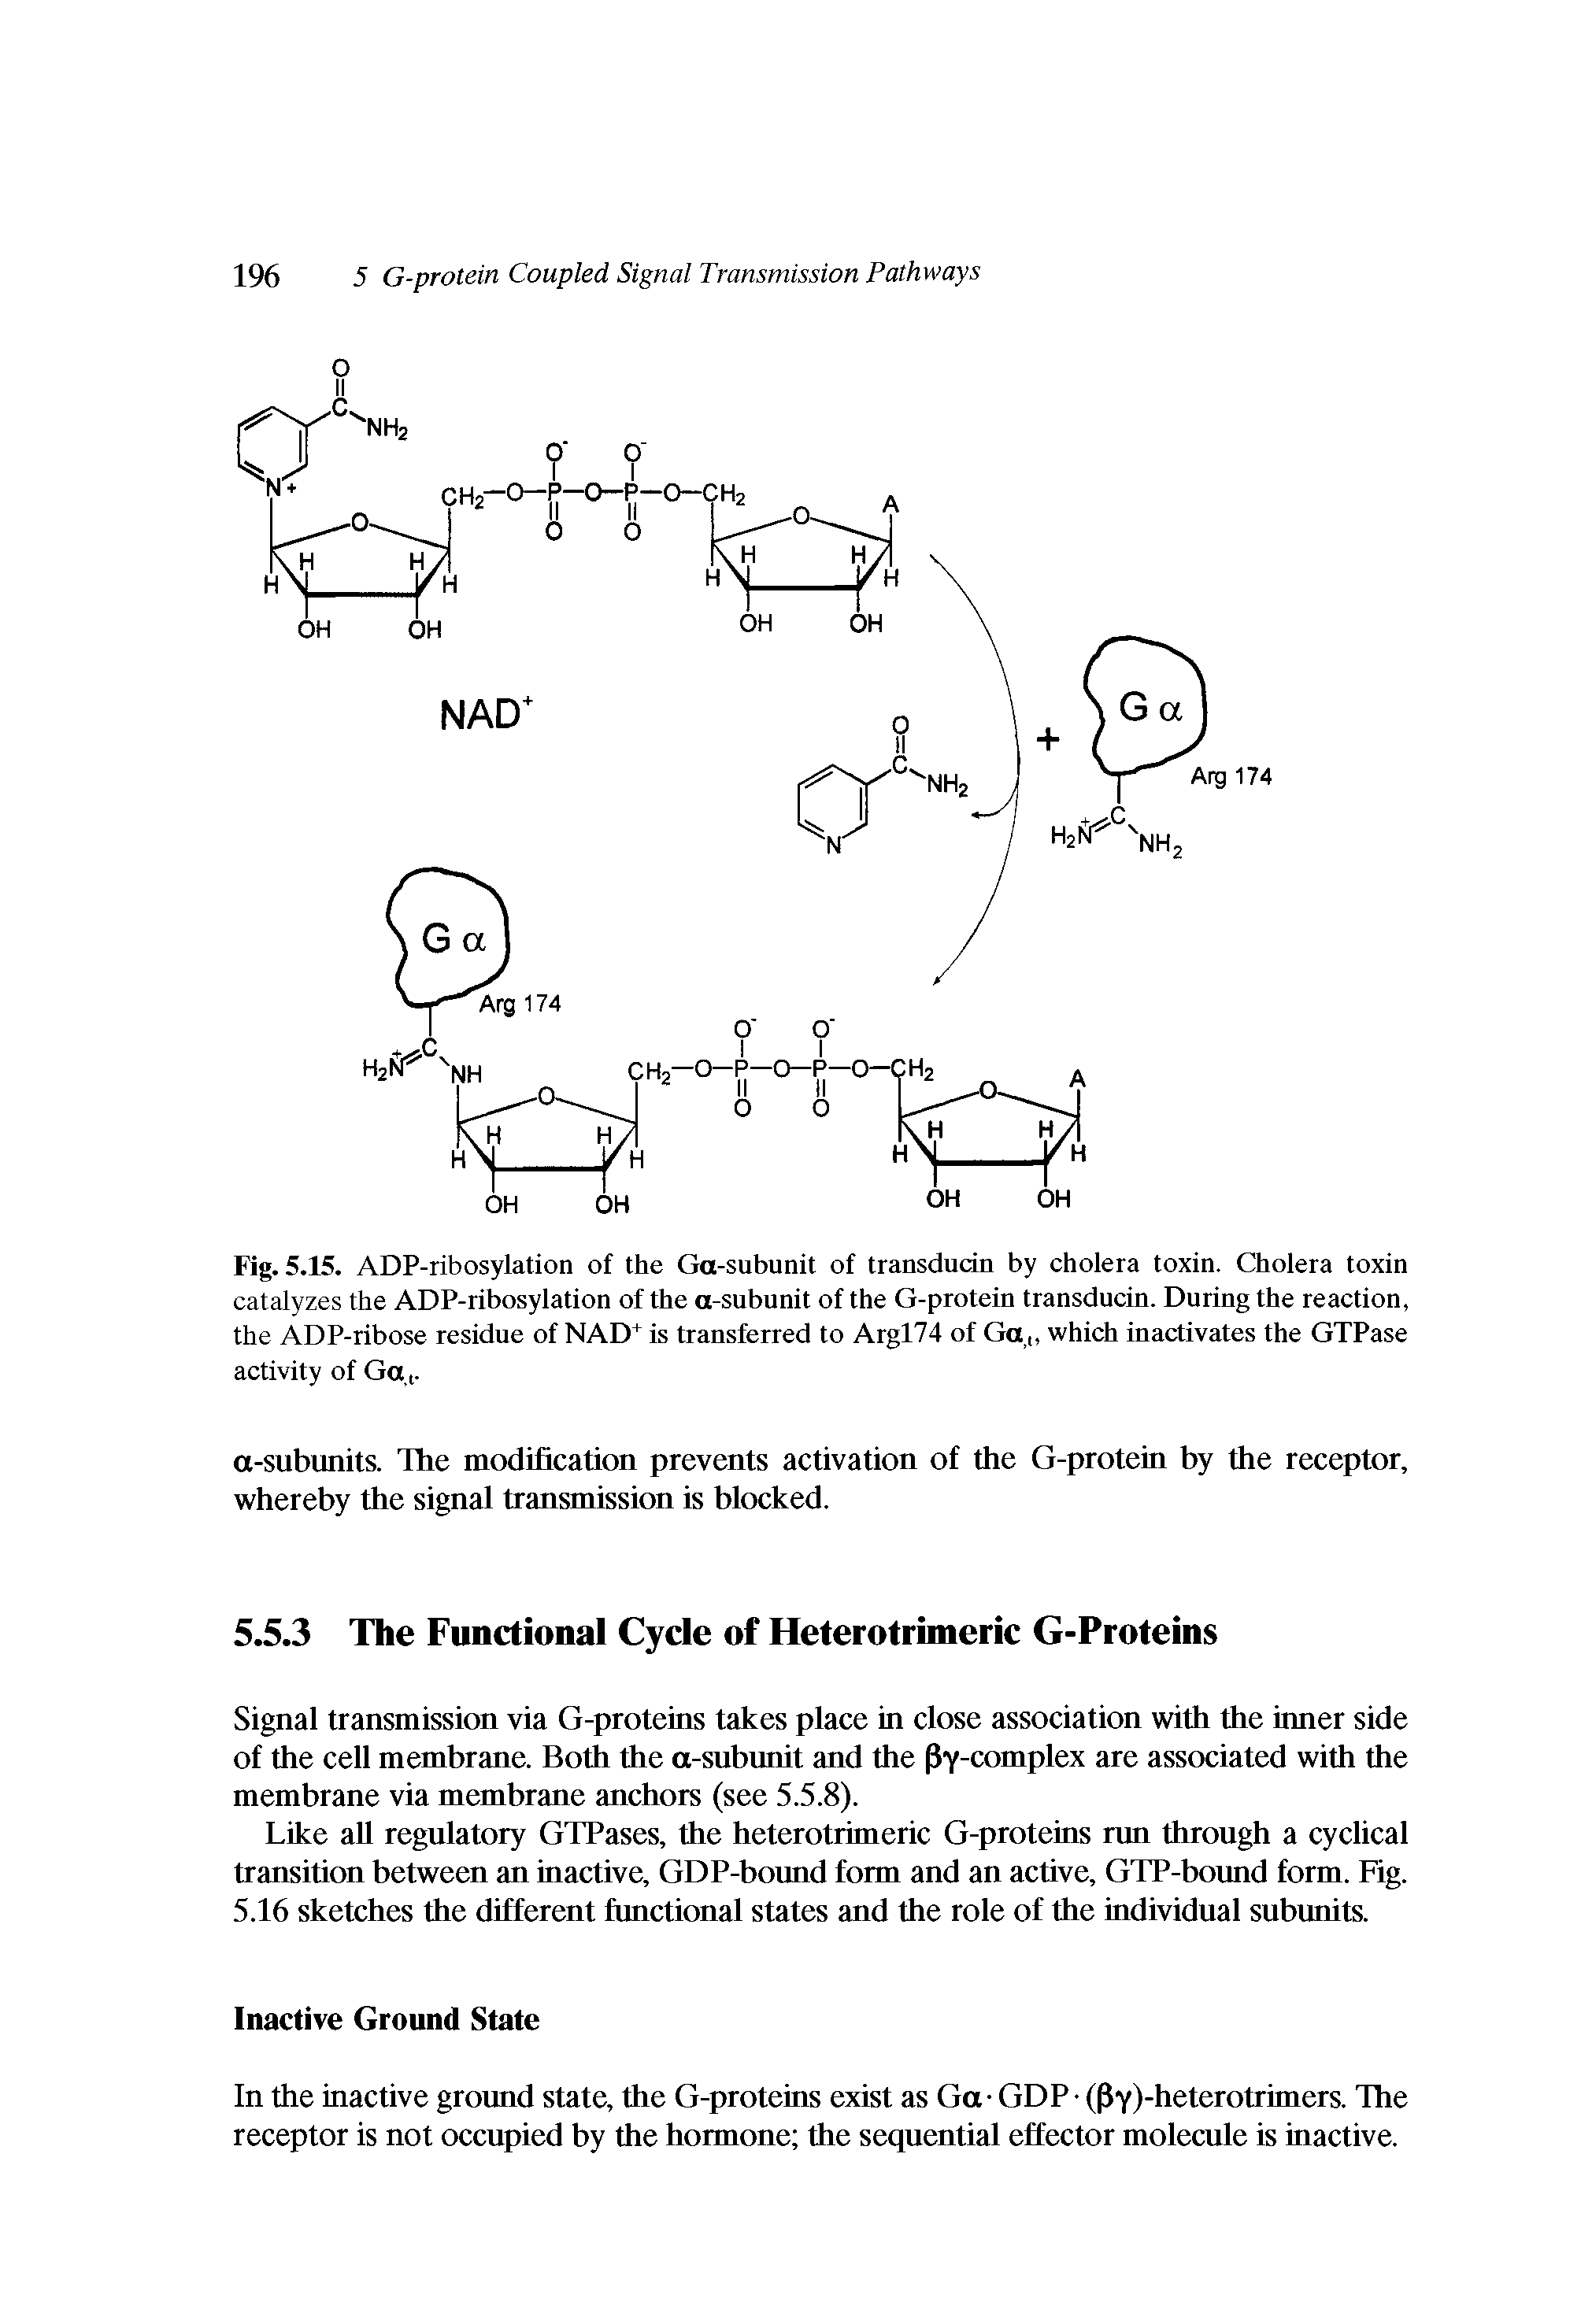 Fig. 5.15. ADP-ribosylation of the Ga-subunit of transdudn by cholera toxin. Cholera toxin catalyzes the ADP-ribosylation of the a-subunit of the G-protein transducin. During the reaction, the ADP-ribose residue of NAD+ is transferred to Argl74 of Ga which inactivates the GTPase activity of Ga i-...